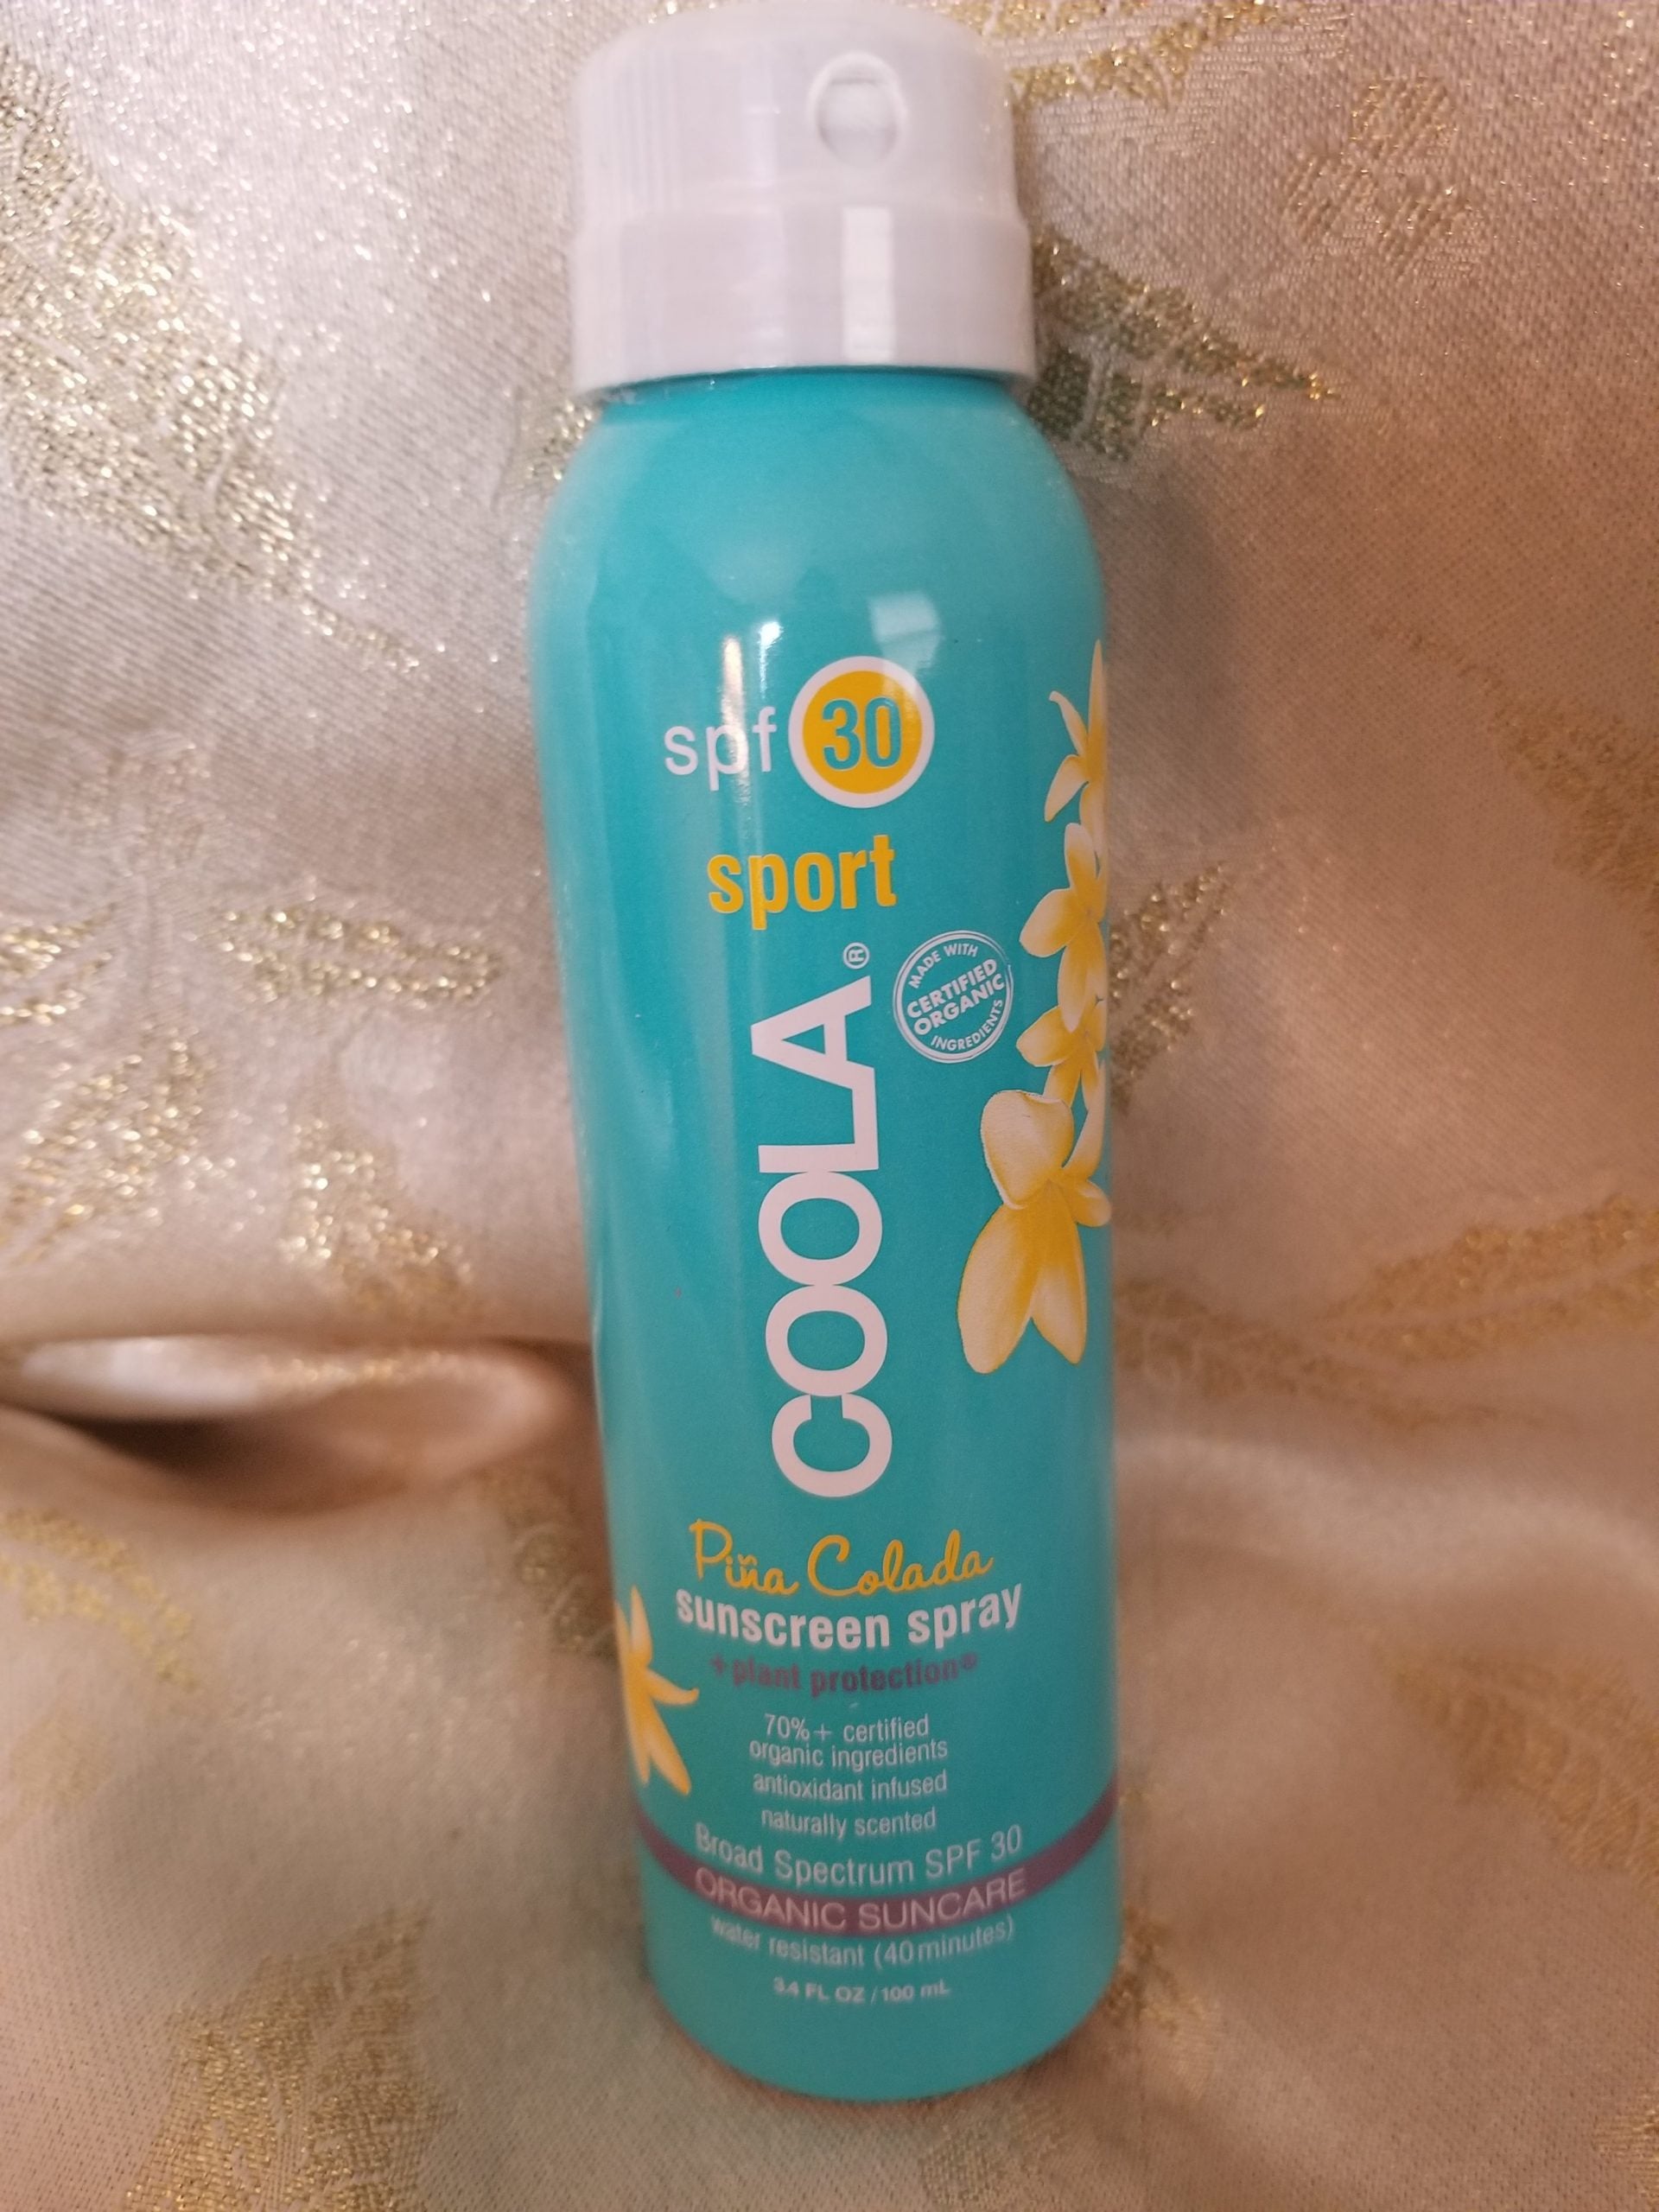 Review, Ingredients, Photos, Swatches, Skincare Trend 2017, 2018, 2019: Coola Classic SPF 30 Dawn Patrol Makeup Primer, SPF 30 Pina Colada Sunscreen Spray